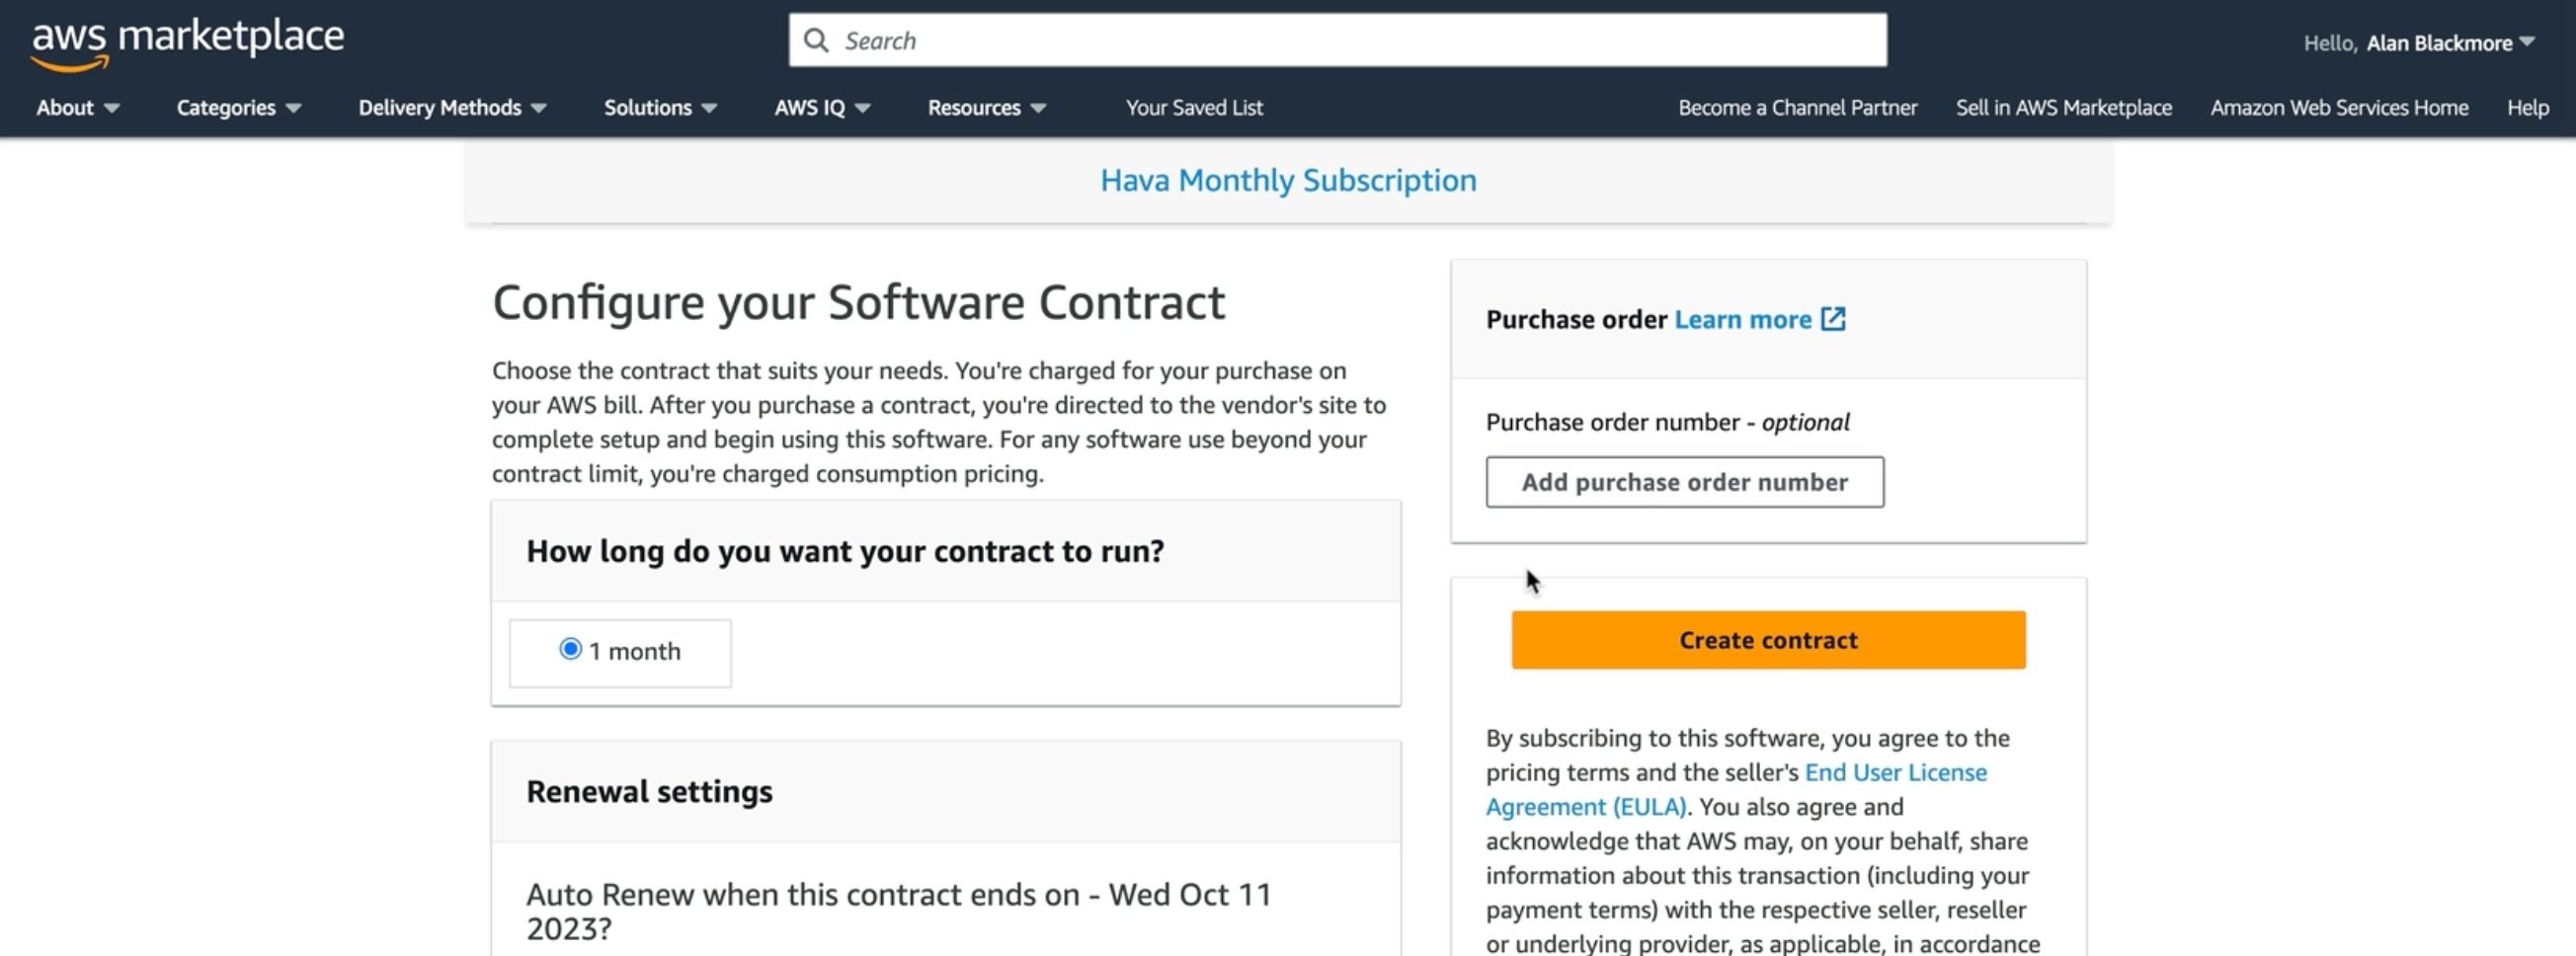 aws_marketplace_6_create_contract